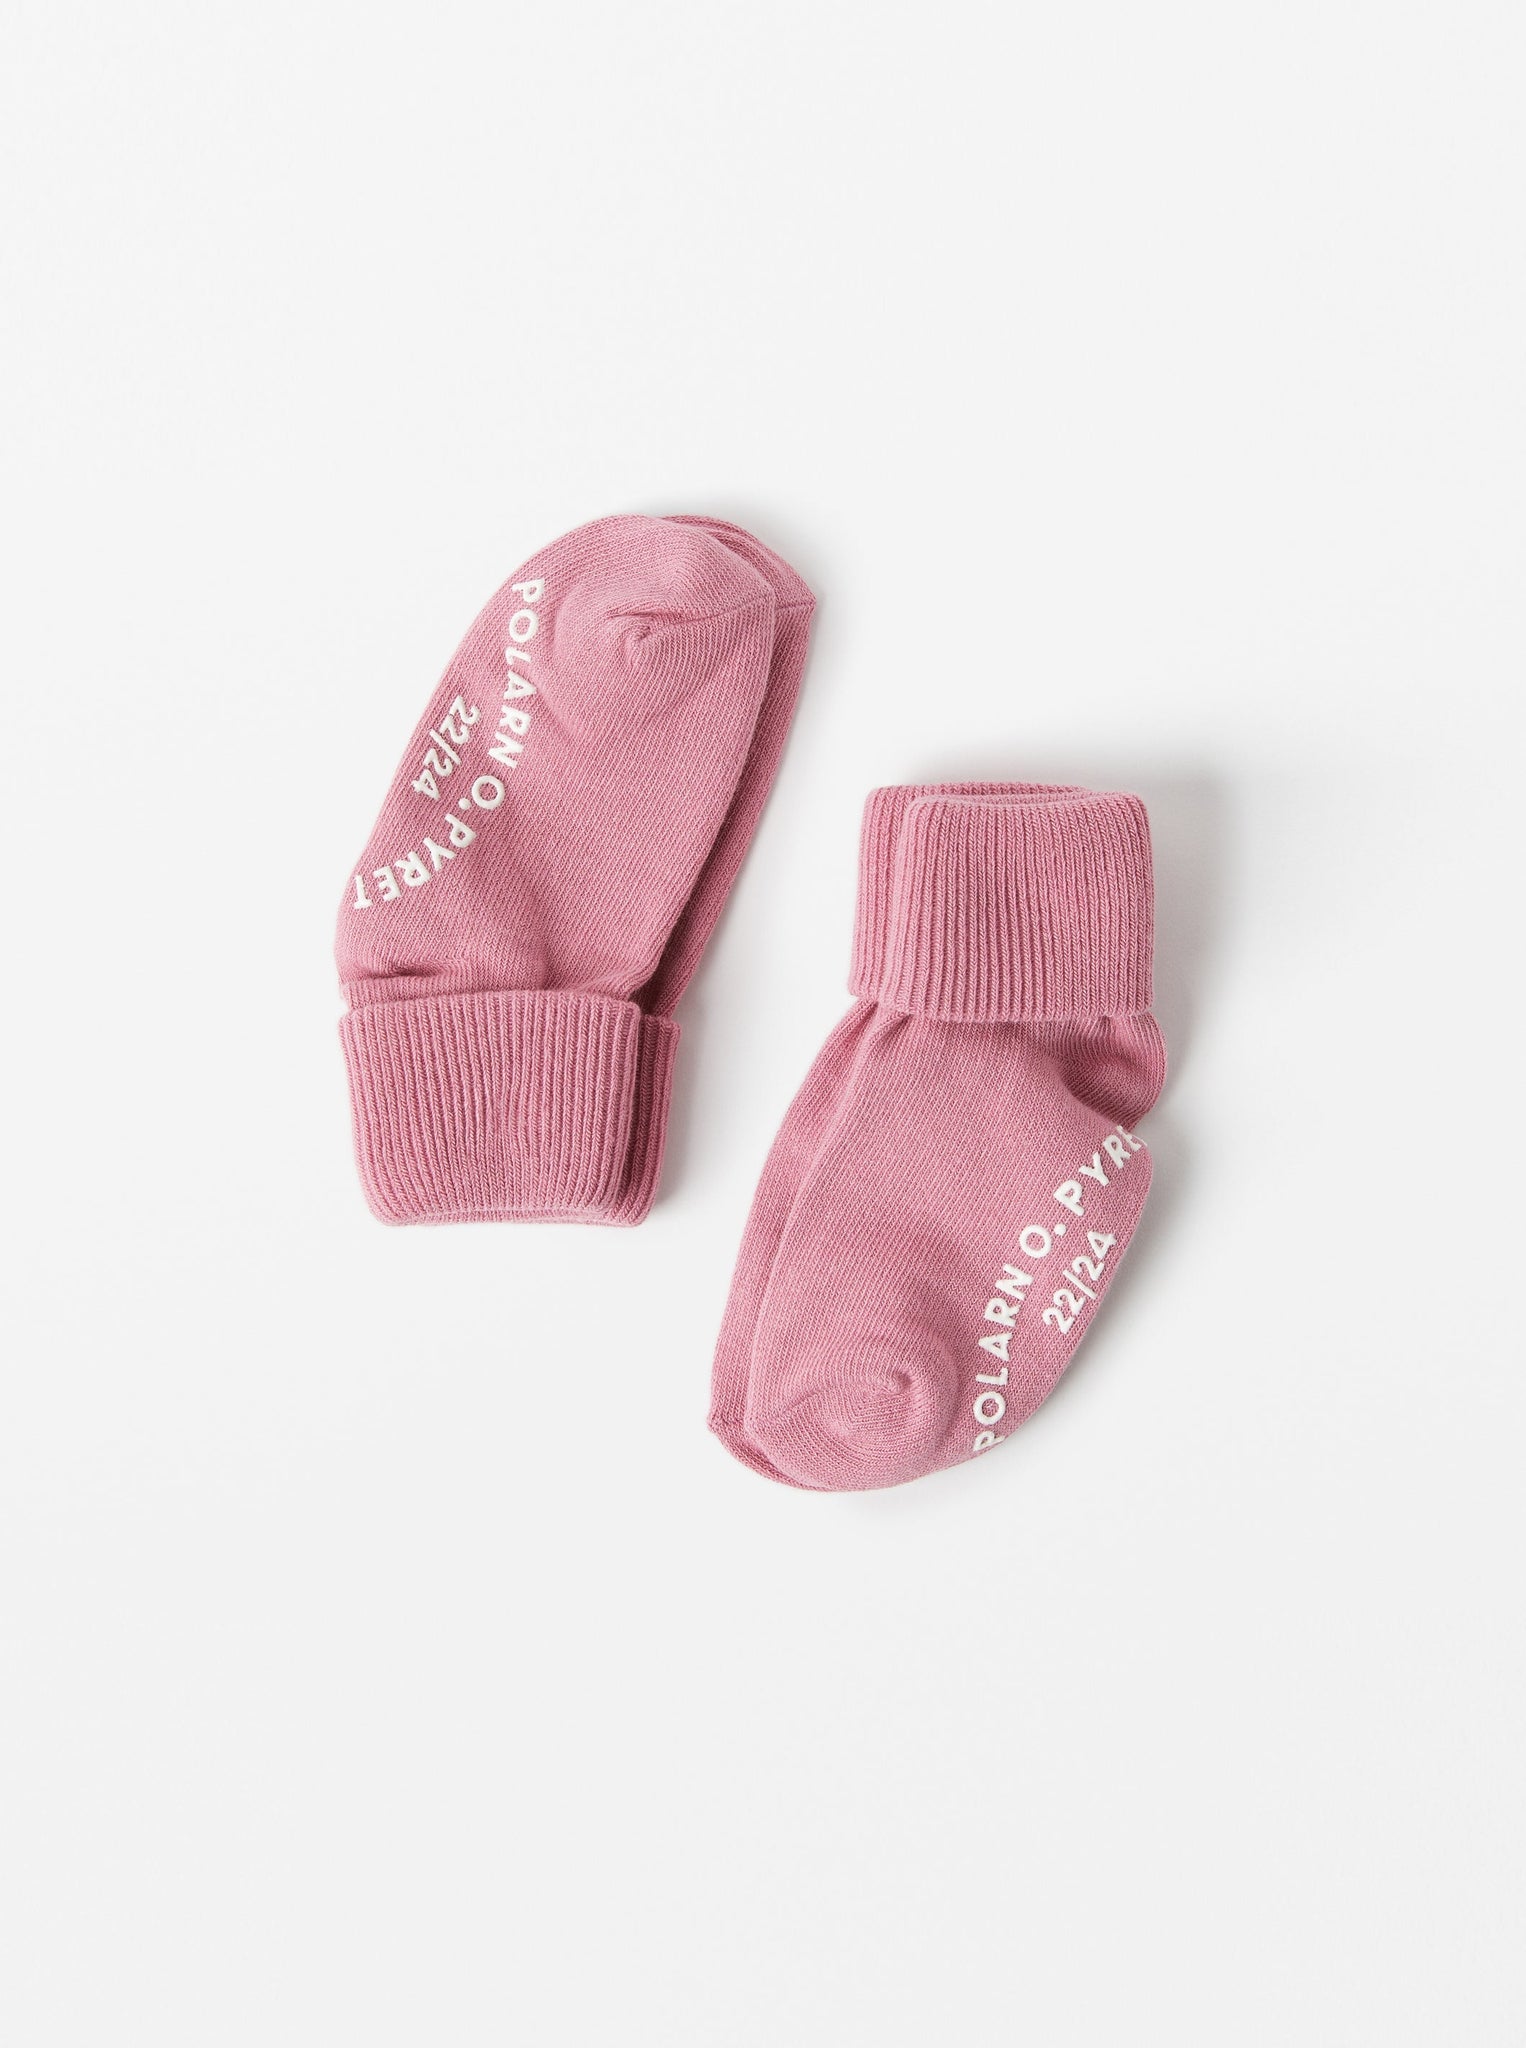 Pink Antislip Kids Socks Multipack from the Polarn O. Pyret Kidswear collection. Nordic kids clothes made from sustainable sources.